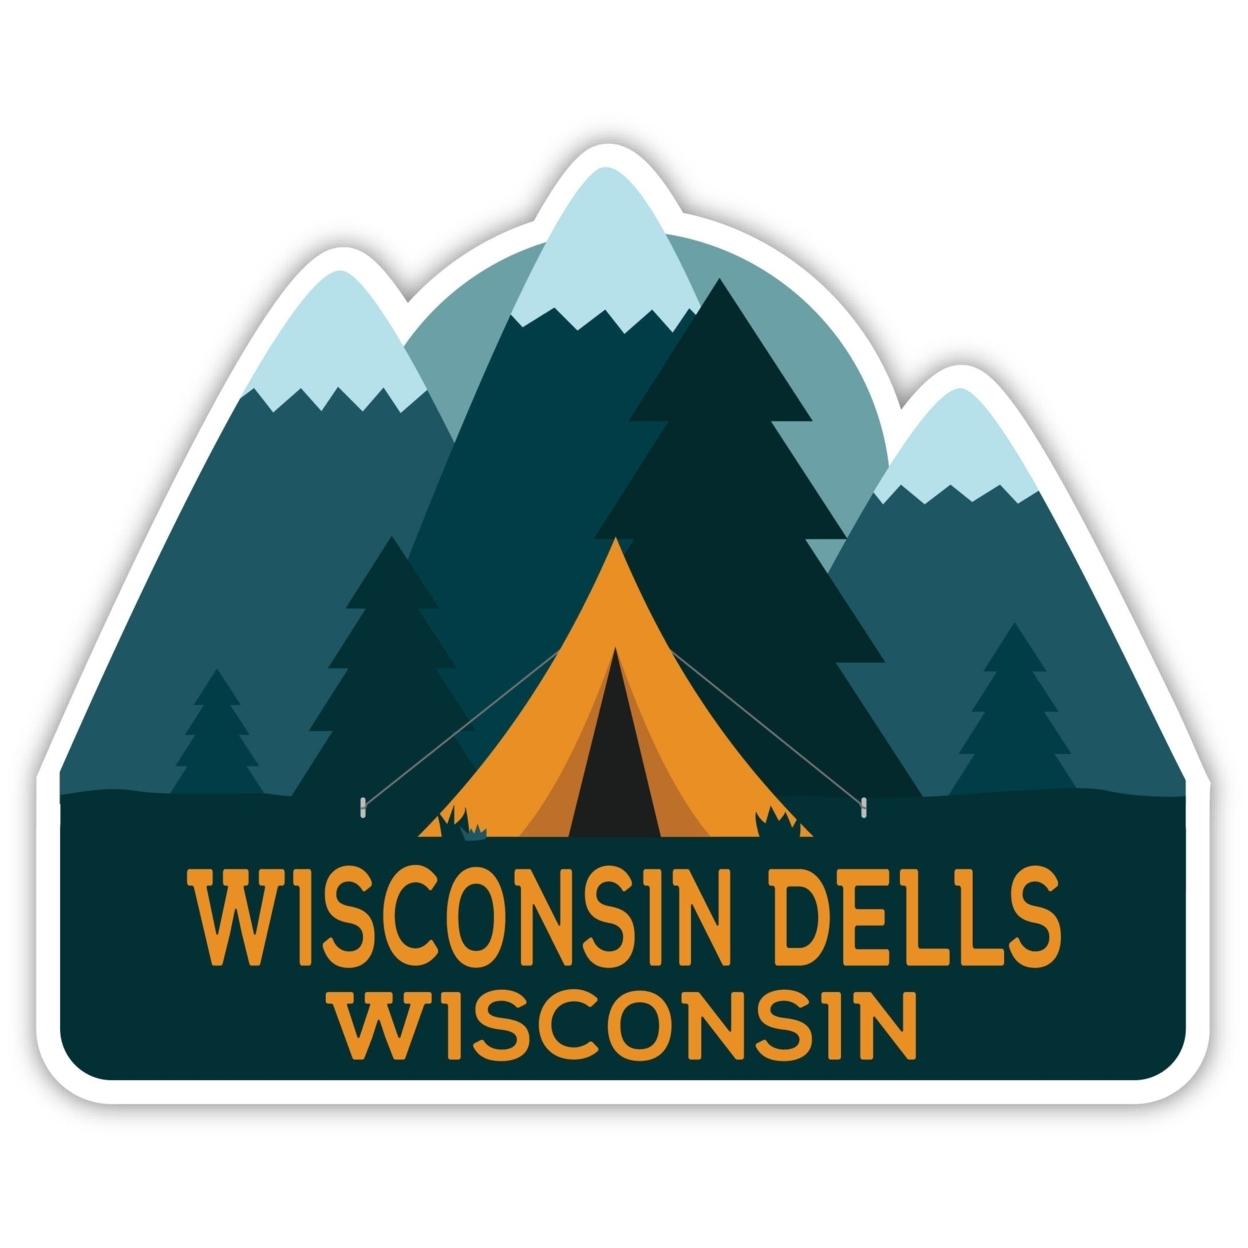 Wisconsin Dells Wisconsin Souvenir Decorative Stickers (Choose Theme And Size) - Single Unit, 4-Inch, Camp Life